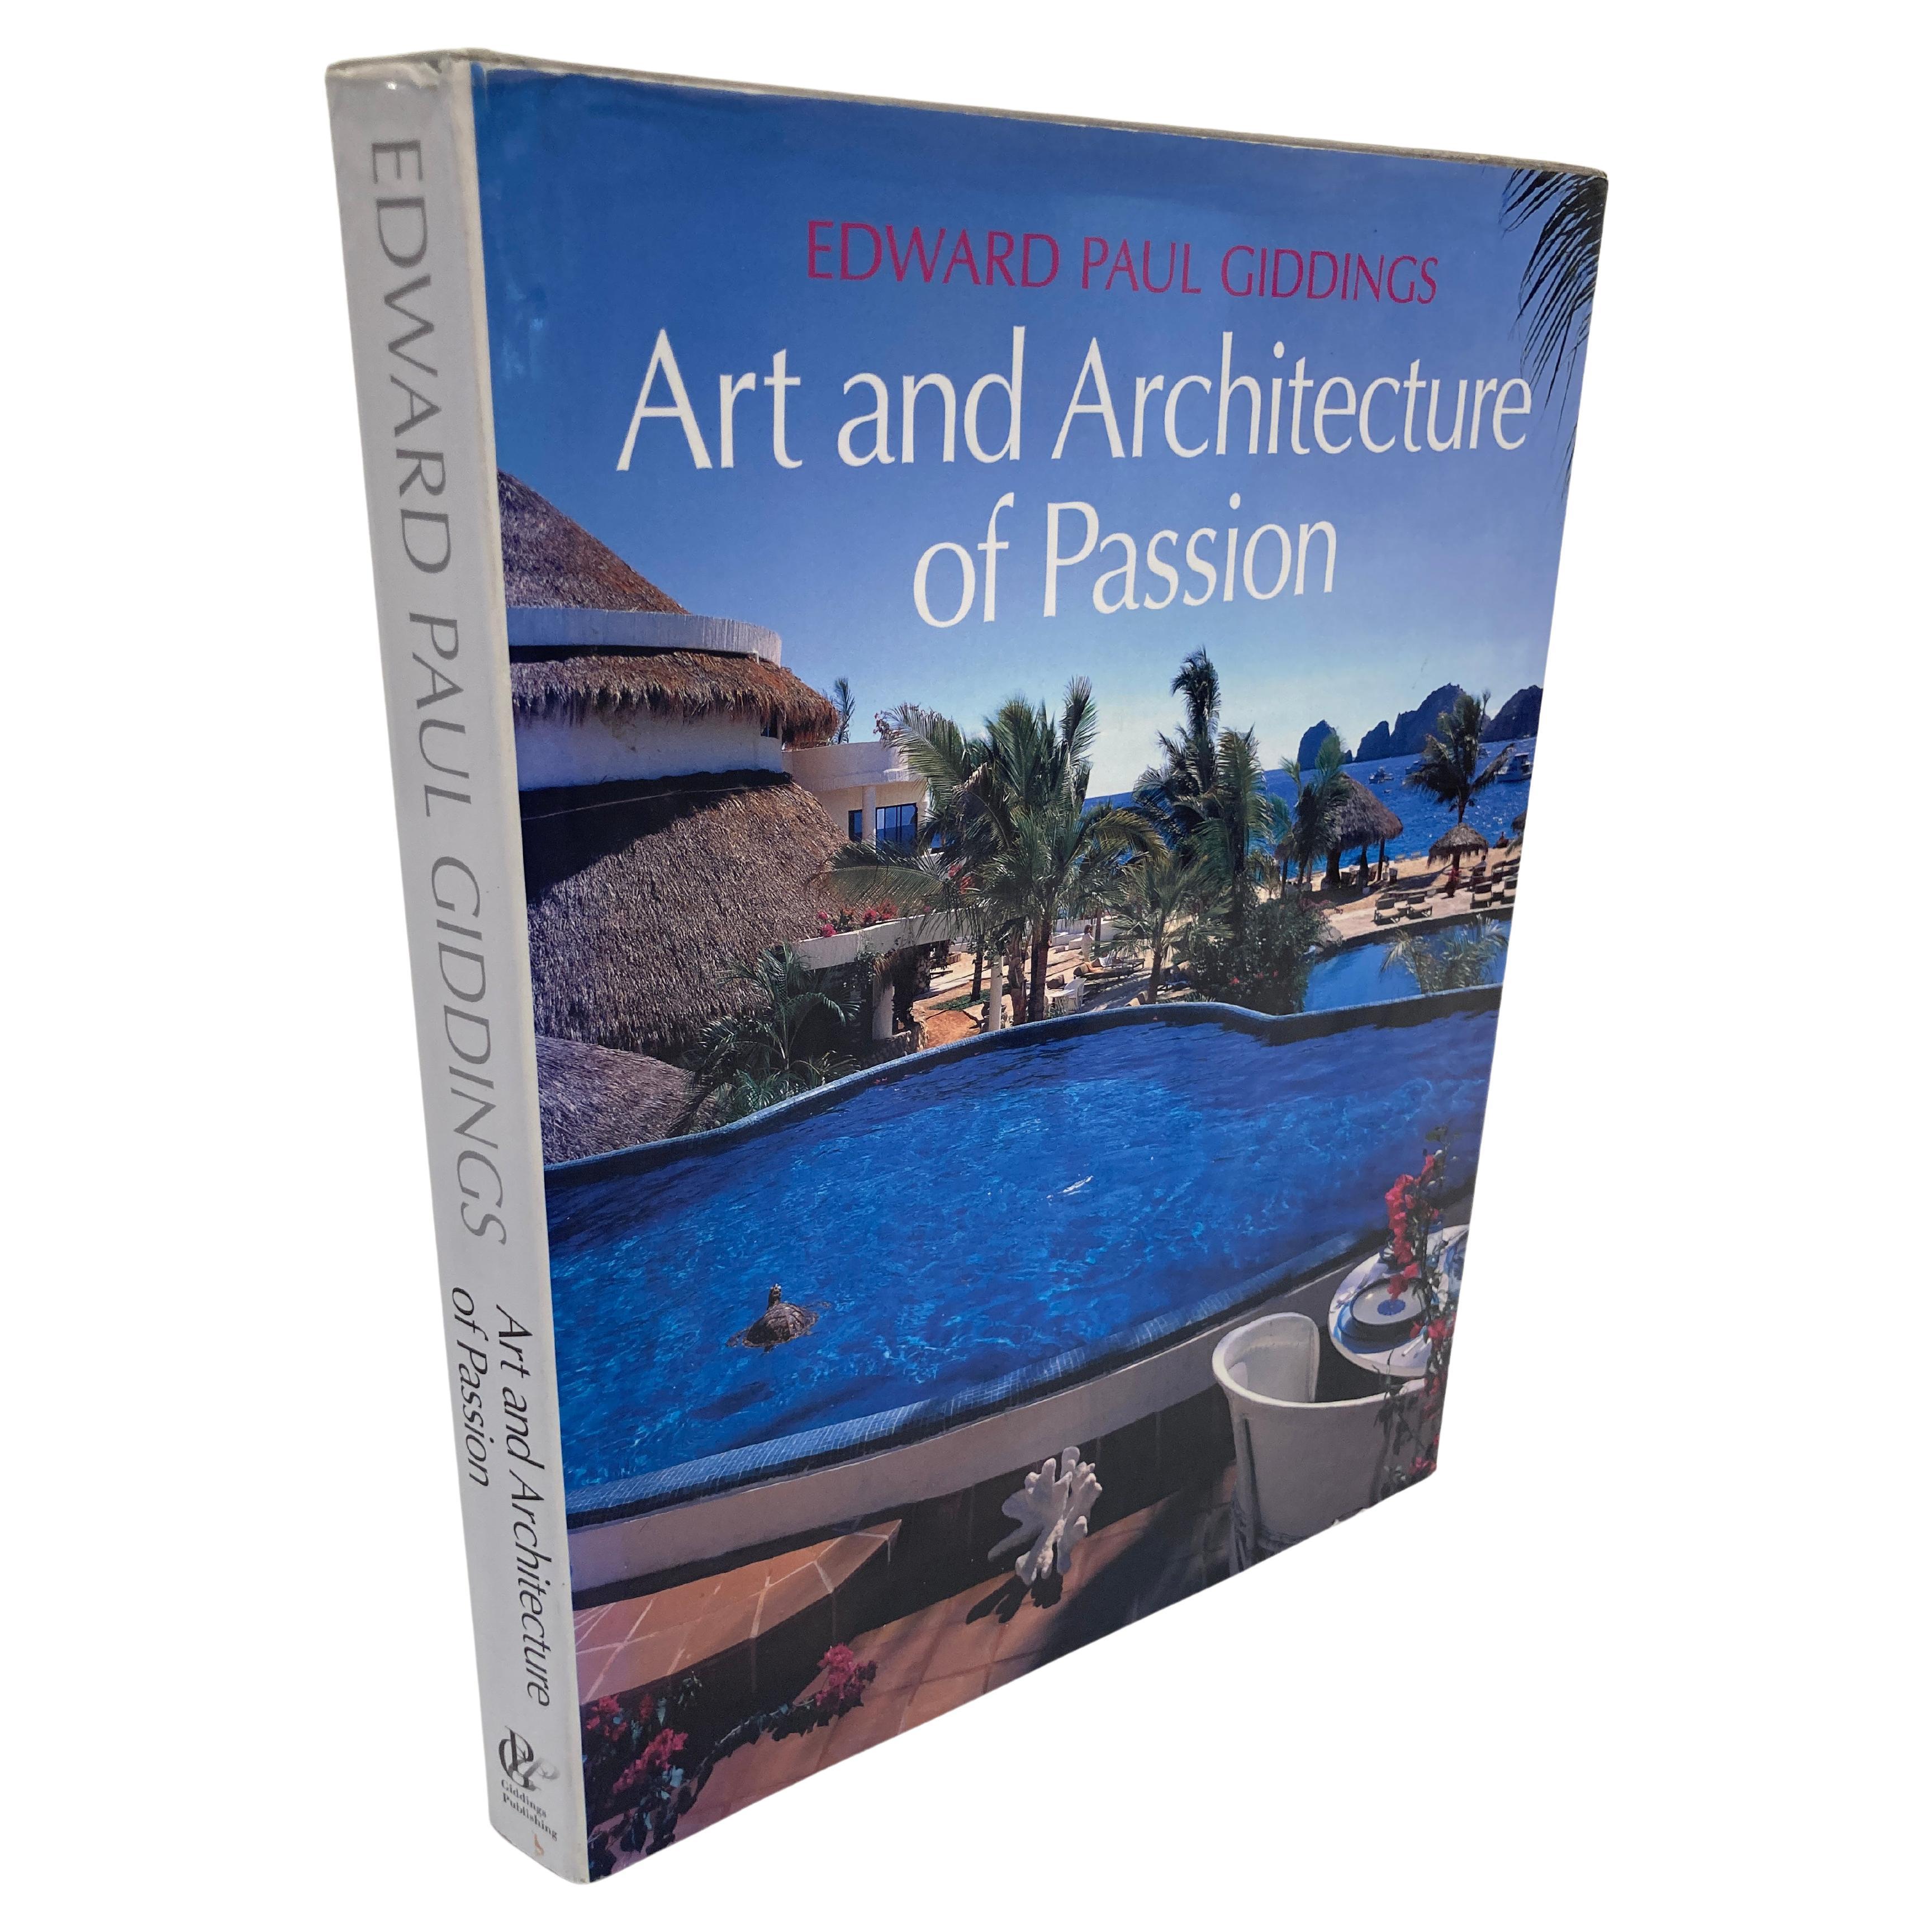 Hardcoverbuch "Art and Architecture of Passion" von Edward Paul Giddings im Angebot